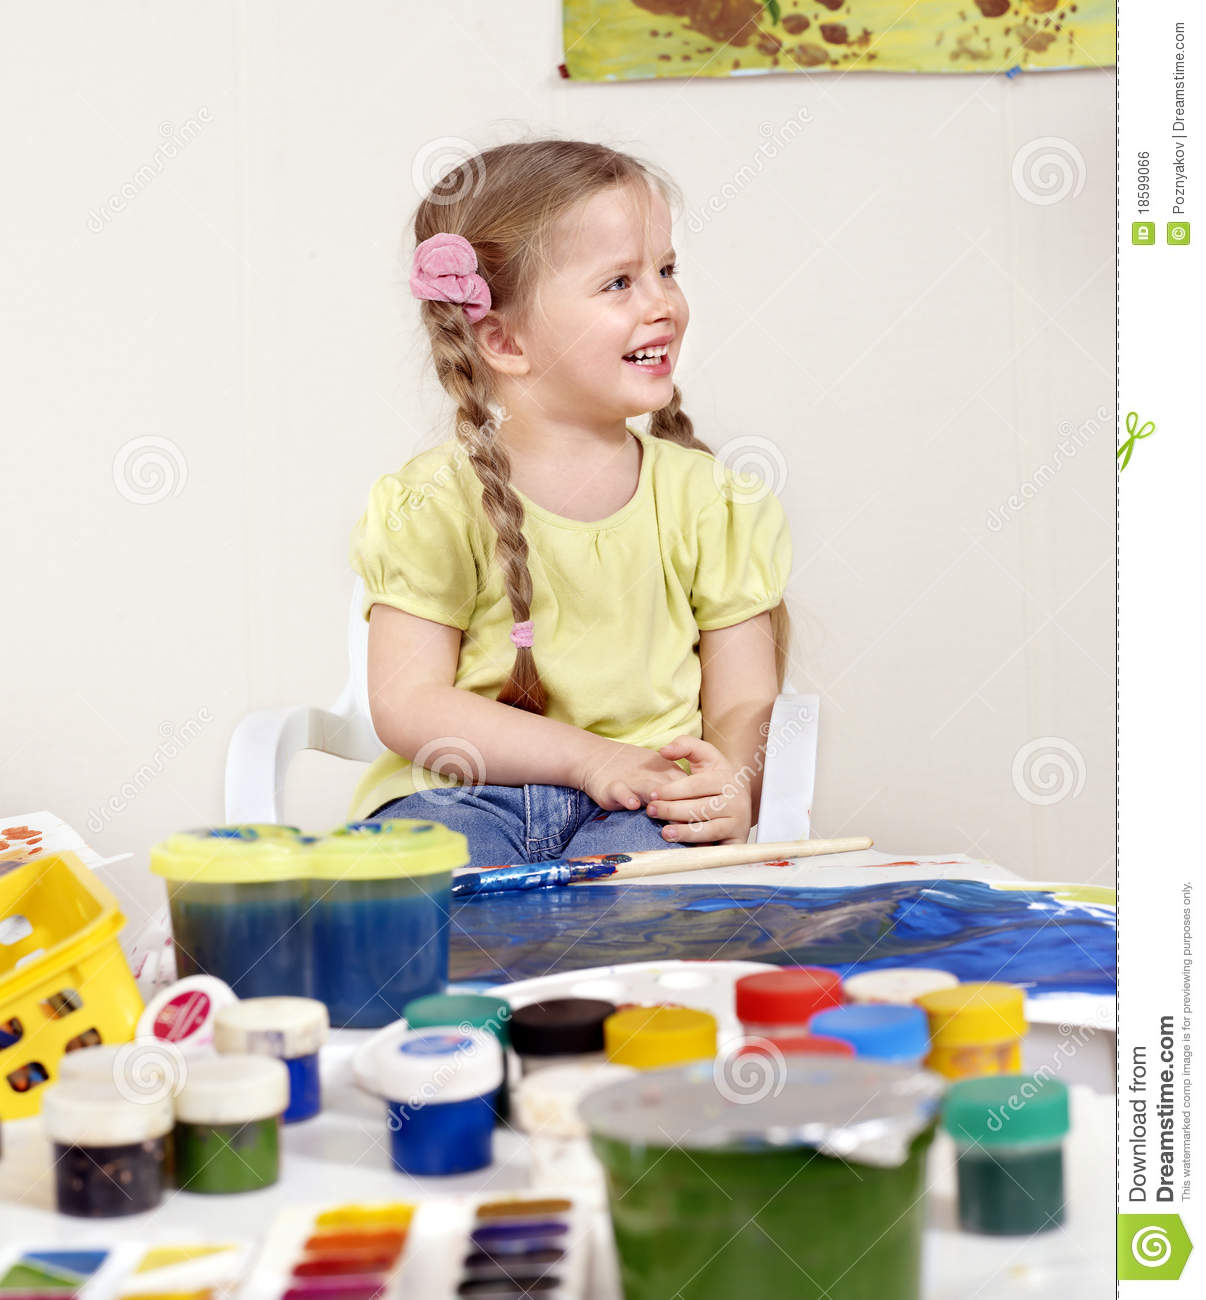 Child Painting In Preschool  Royalty Free Stock Image   Image